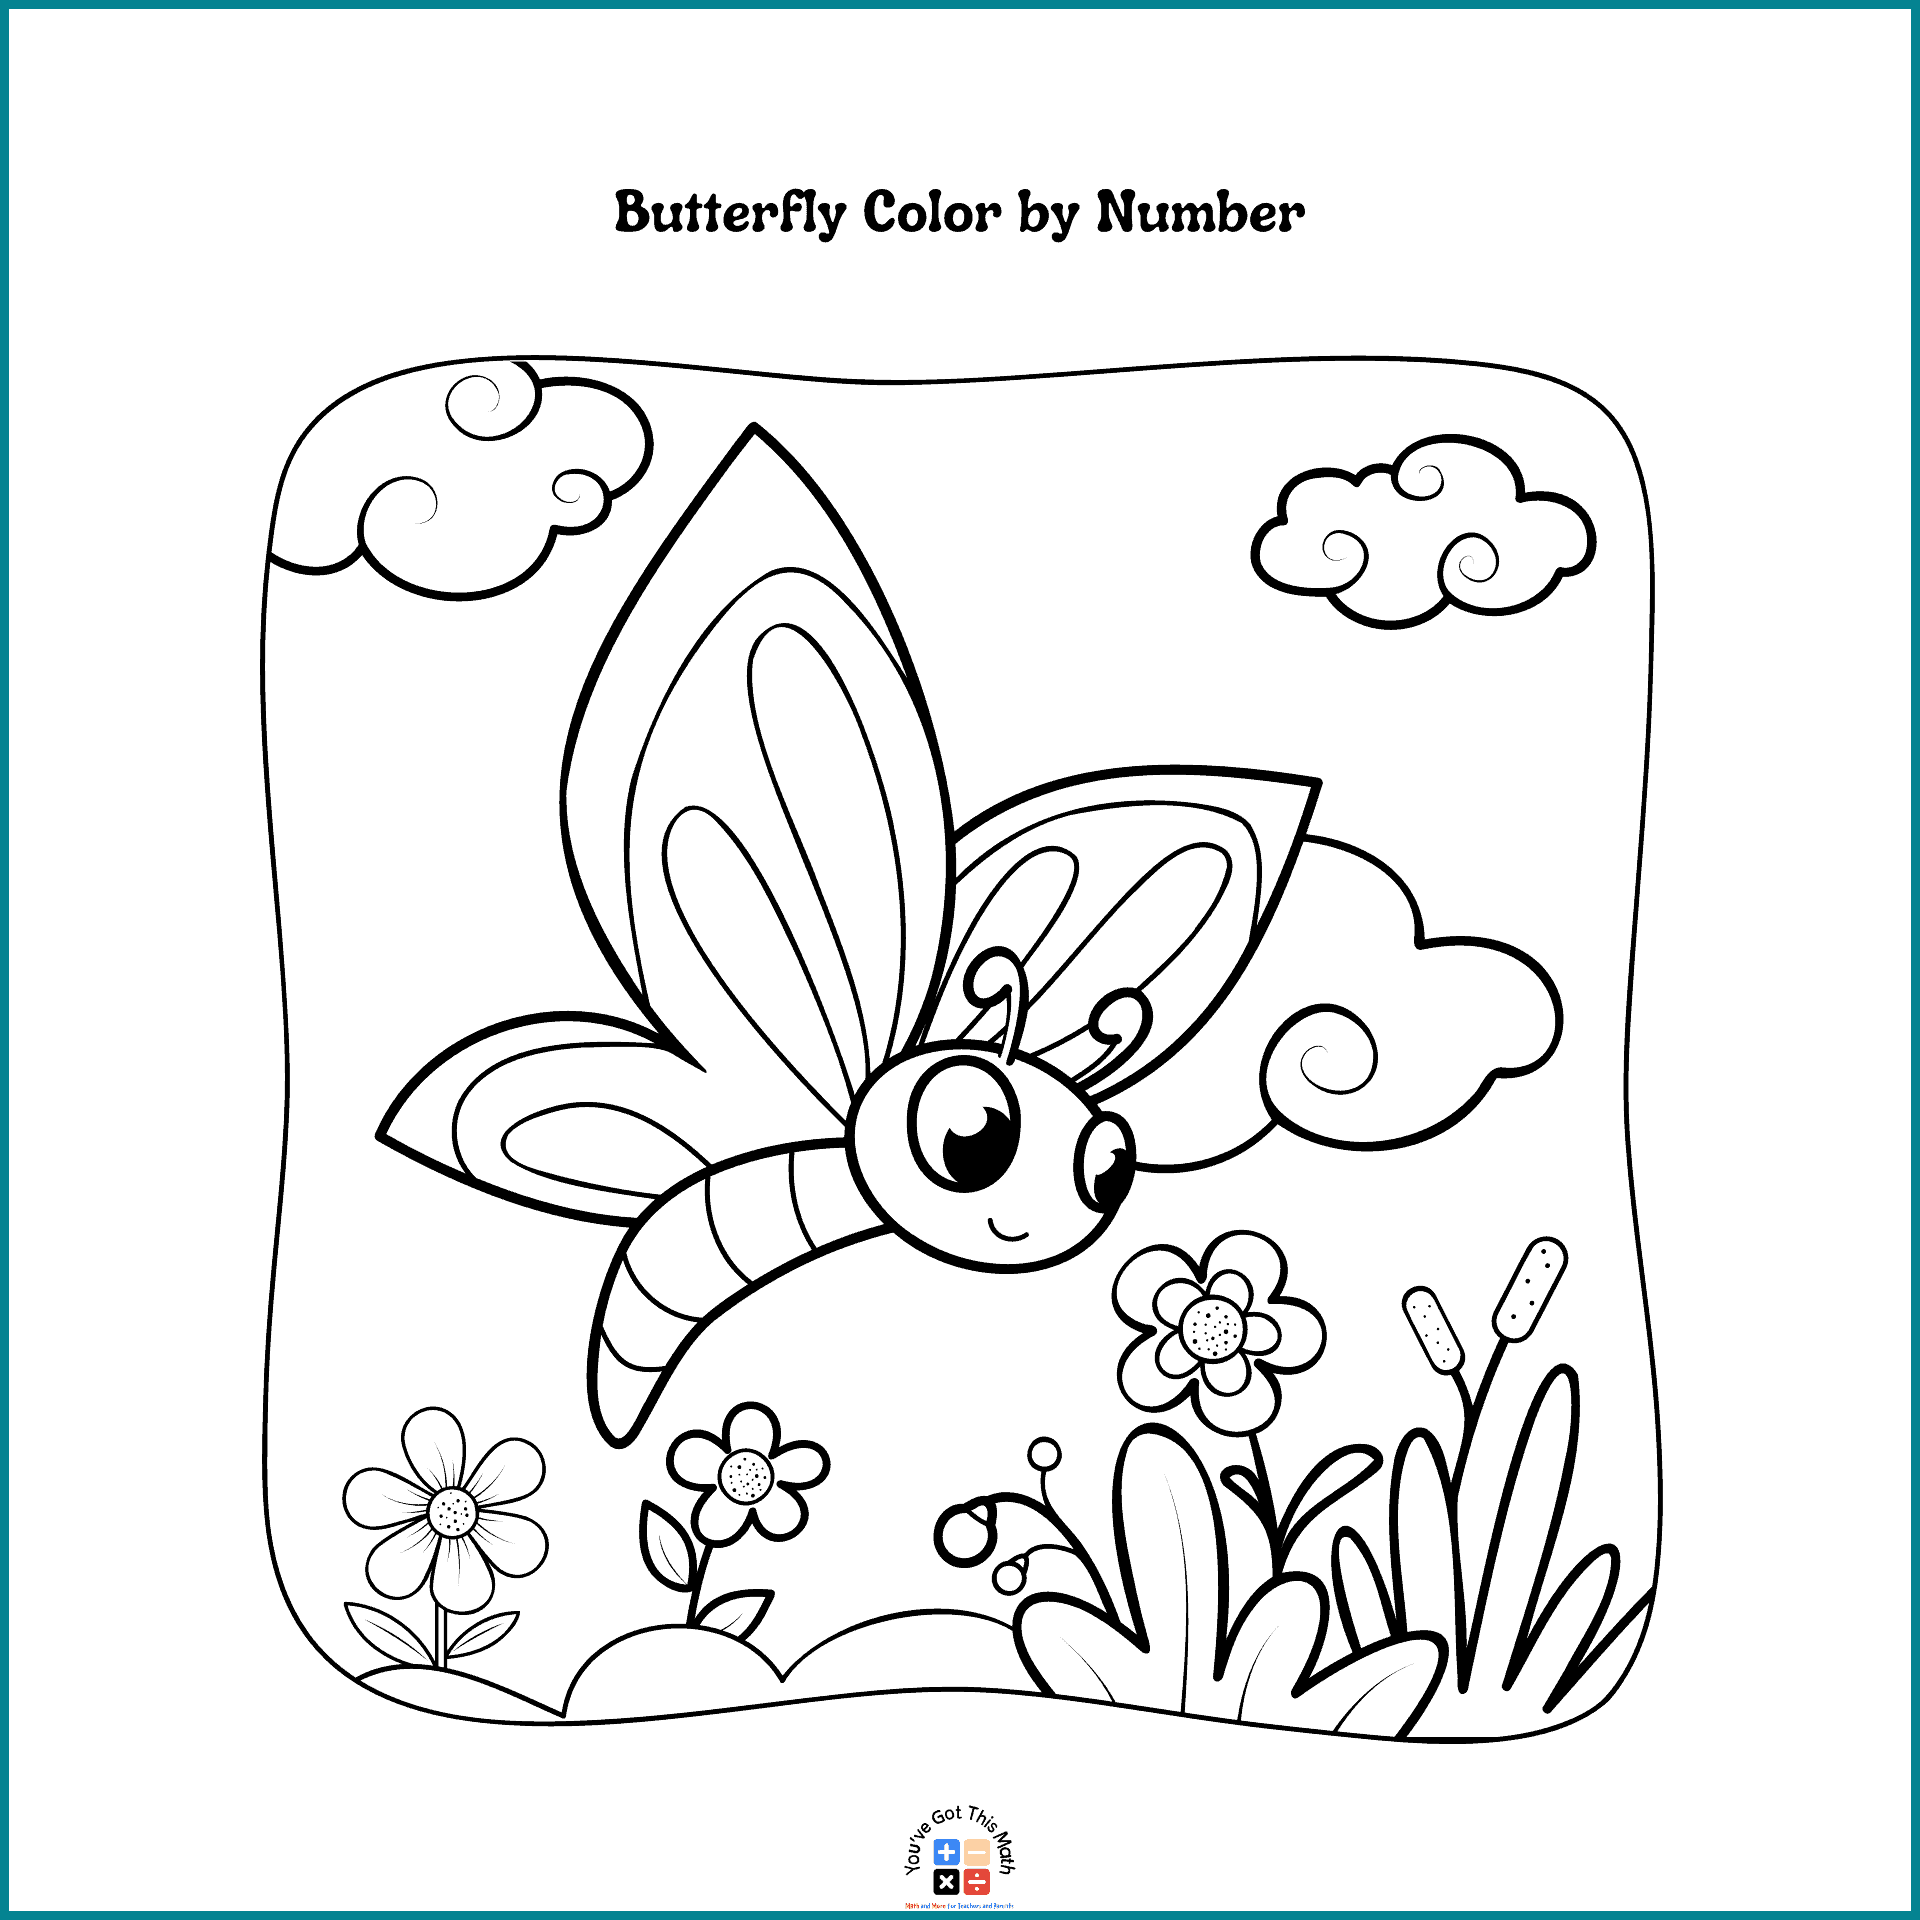 Fun butterfly color by number coloring pages